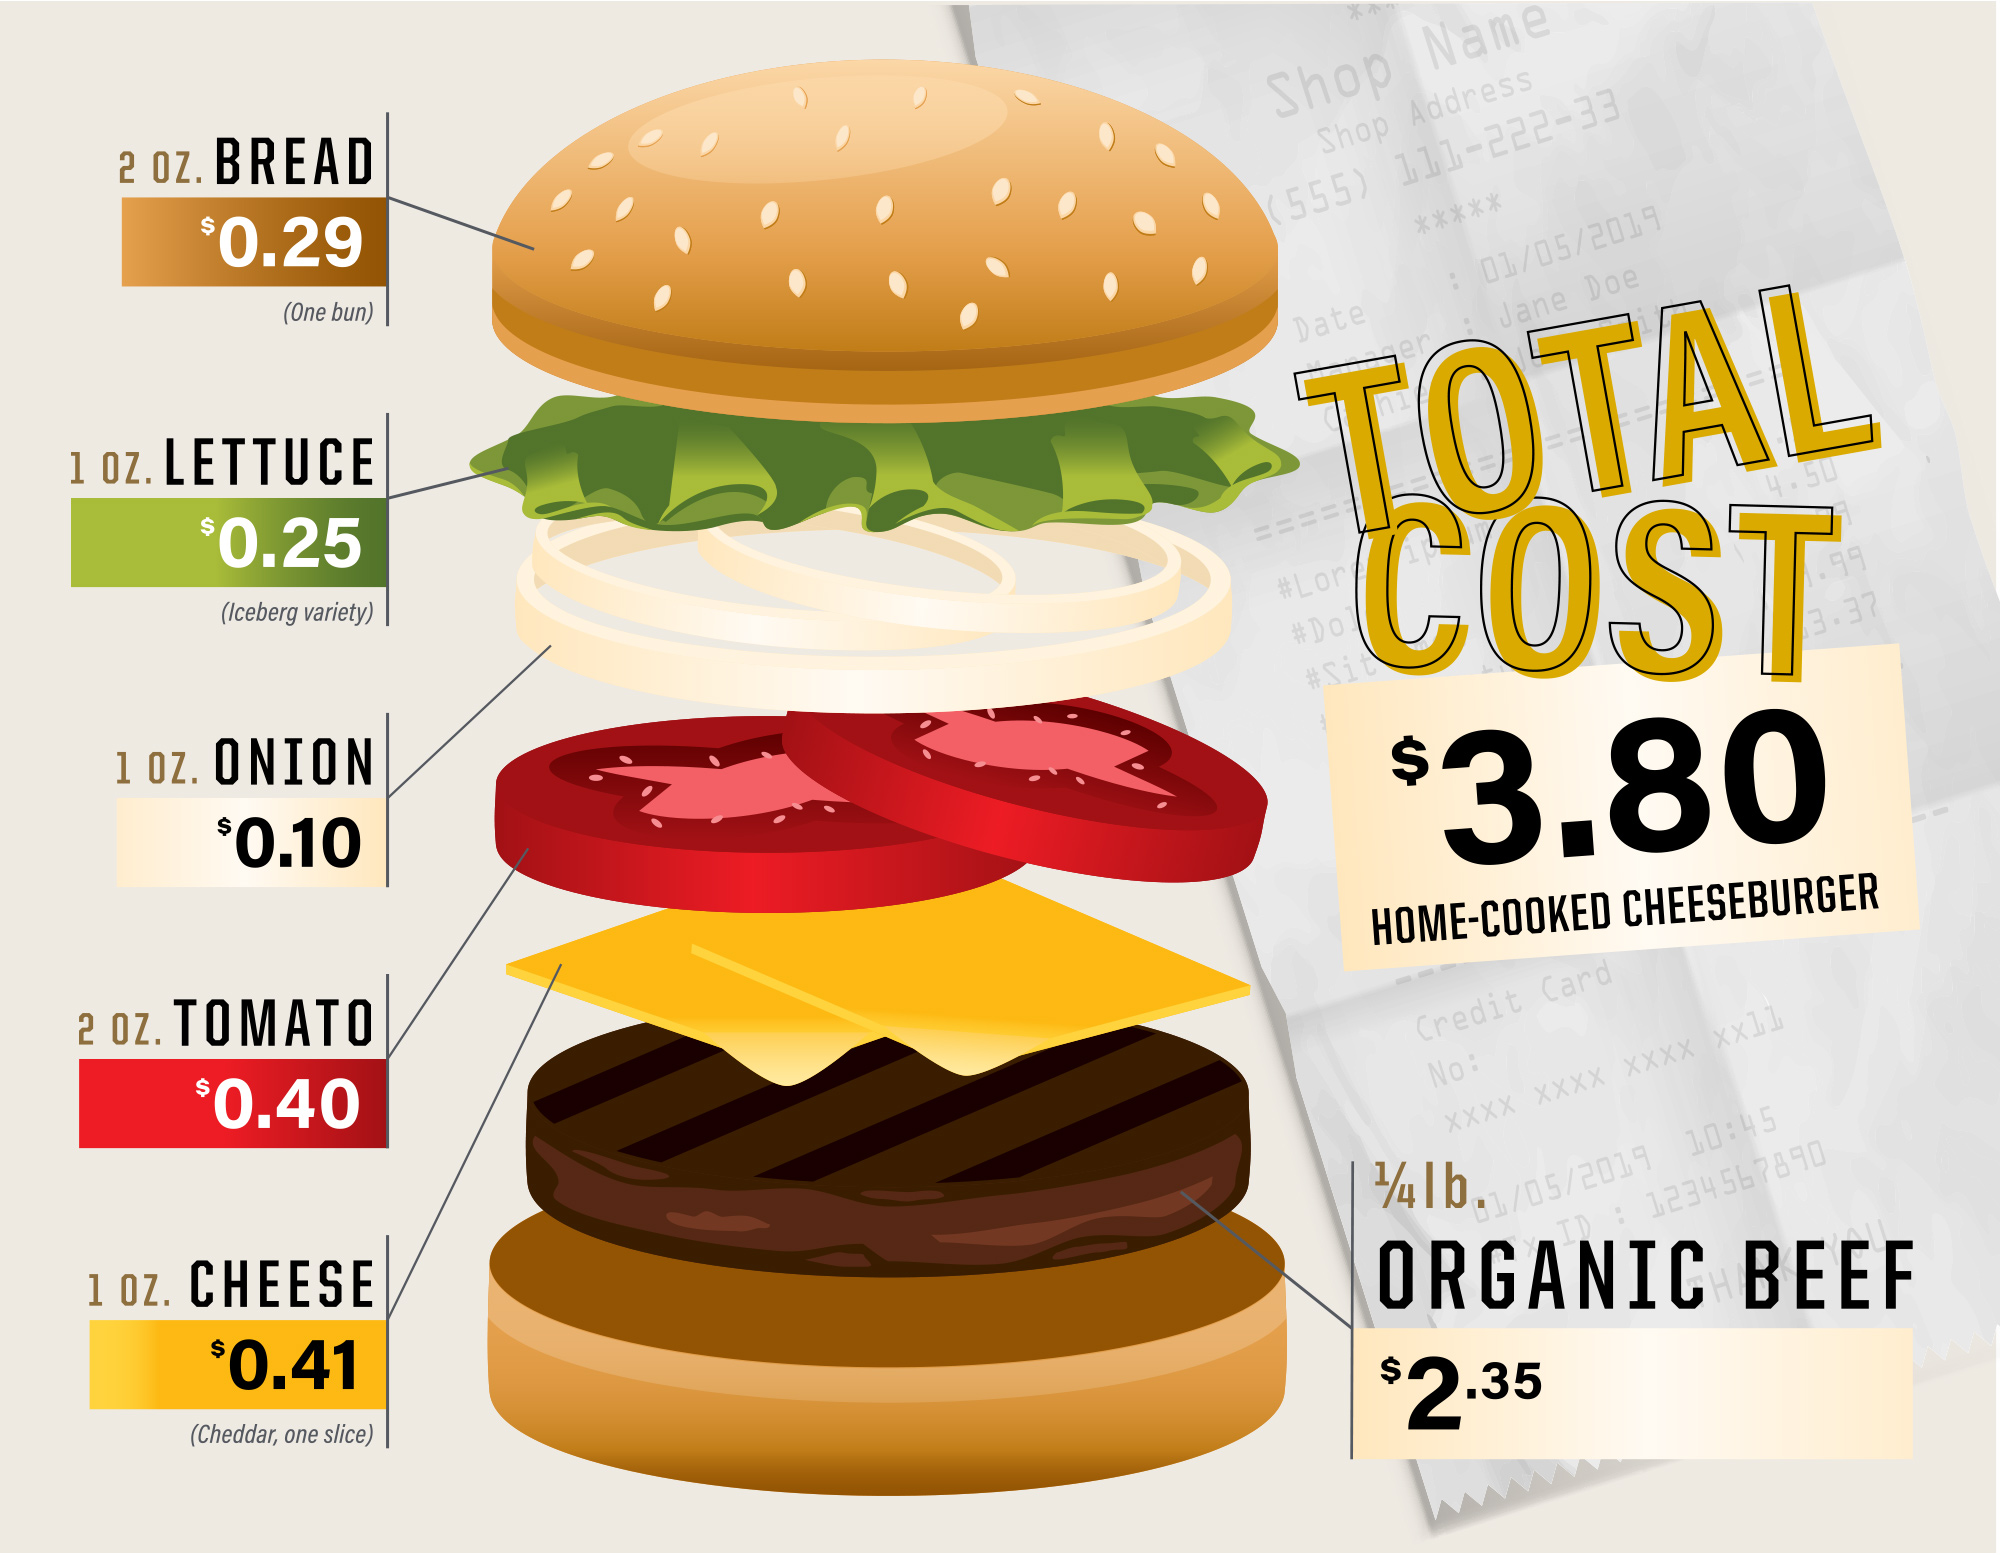 The total cost of a home-cooked burger using ¼ lb. organic ground beef, one 2 oz. bun, 1 oz. lettuce, 1 oz. onion, 2 oz. tomato and one 1 oz. slice of cheese is $3.80.